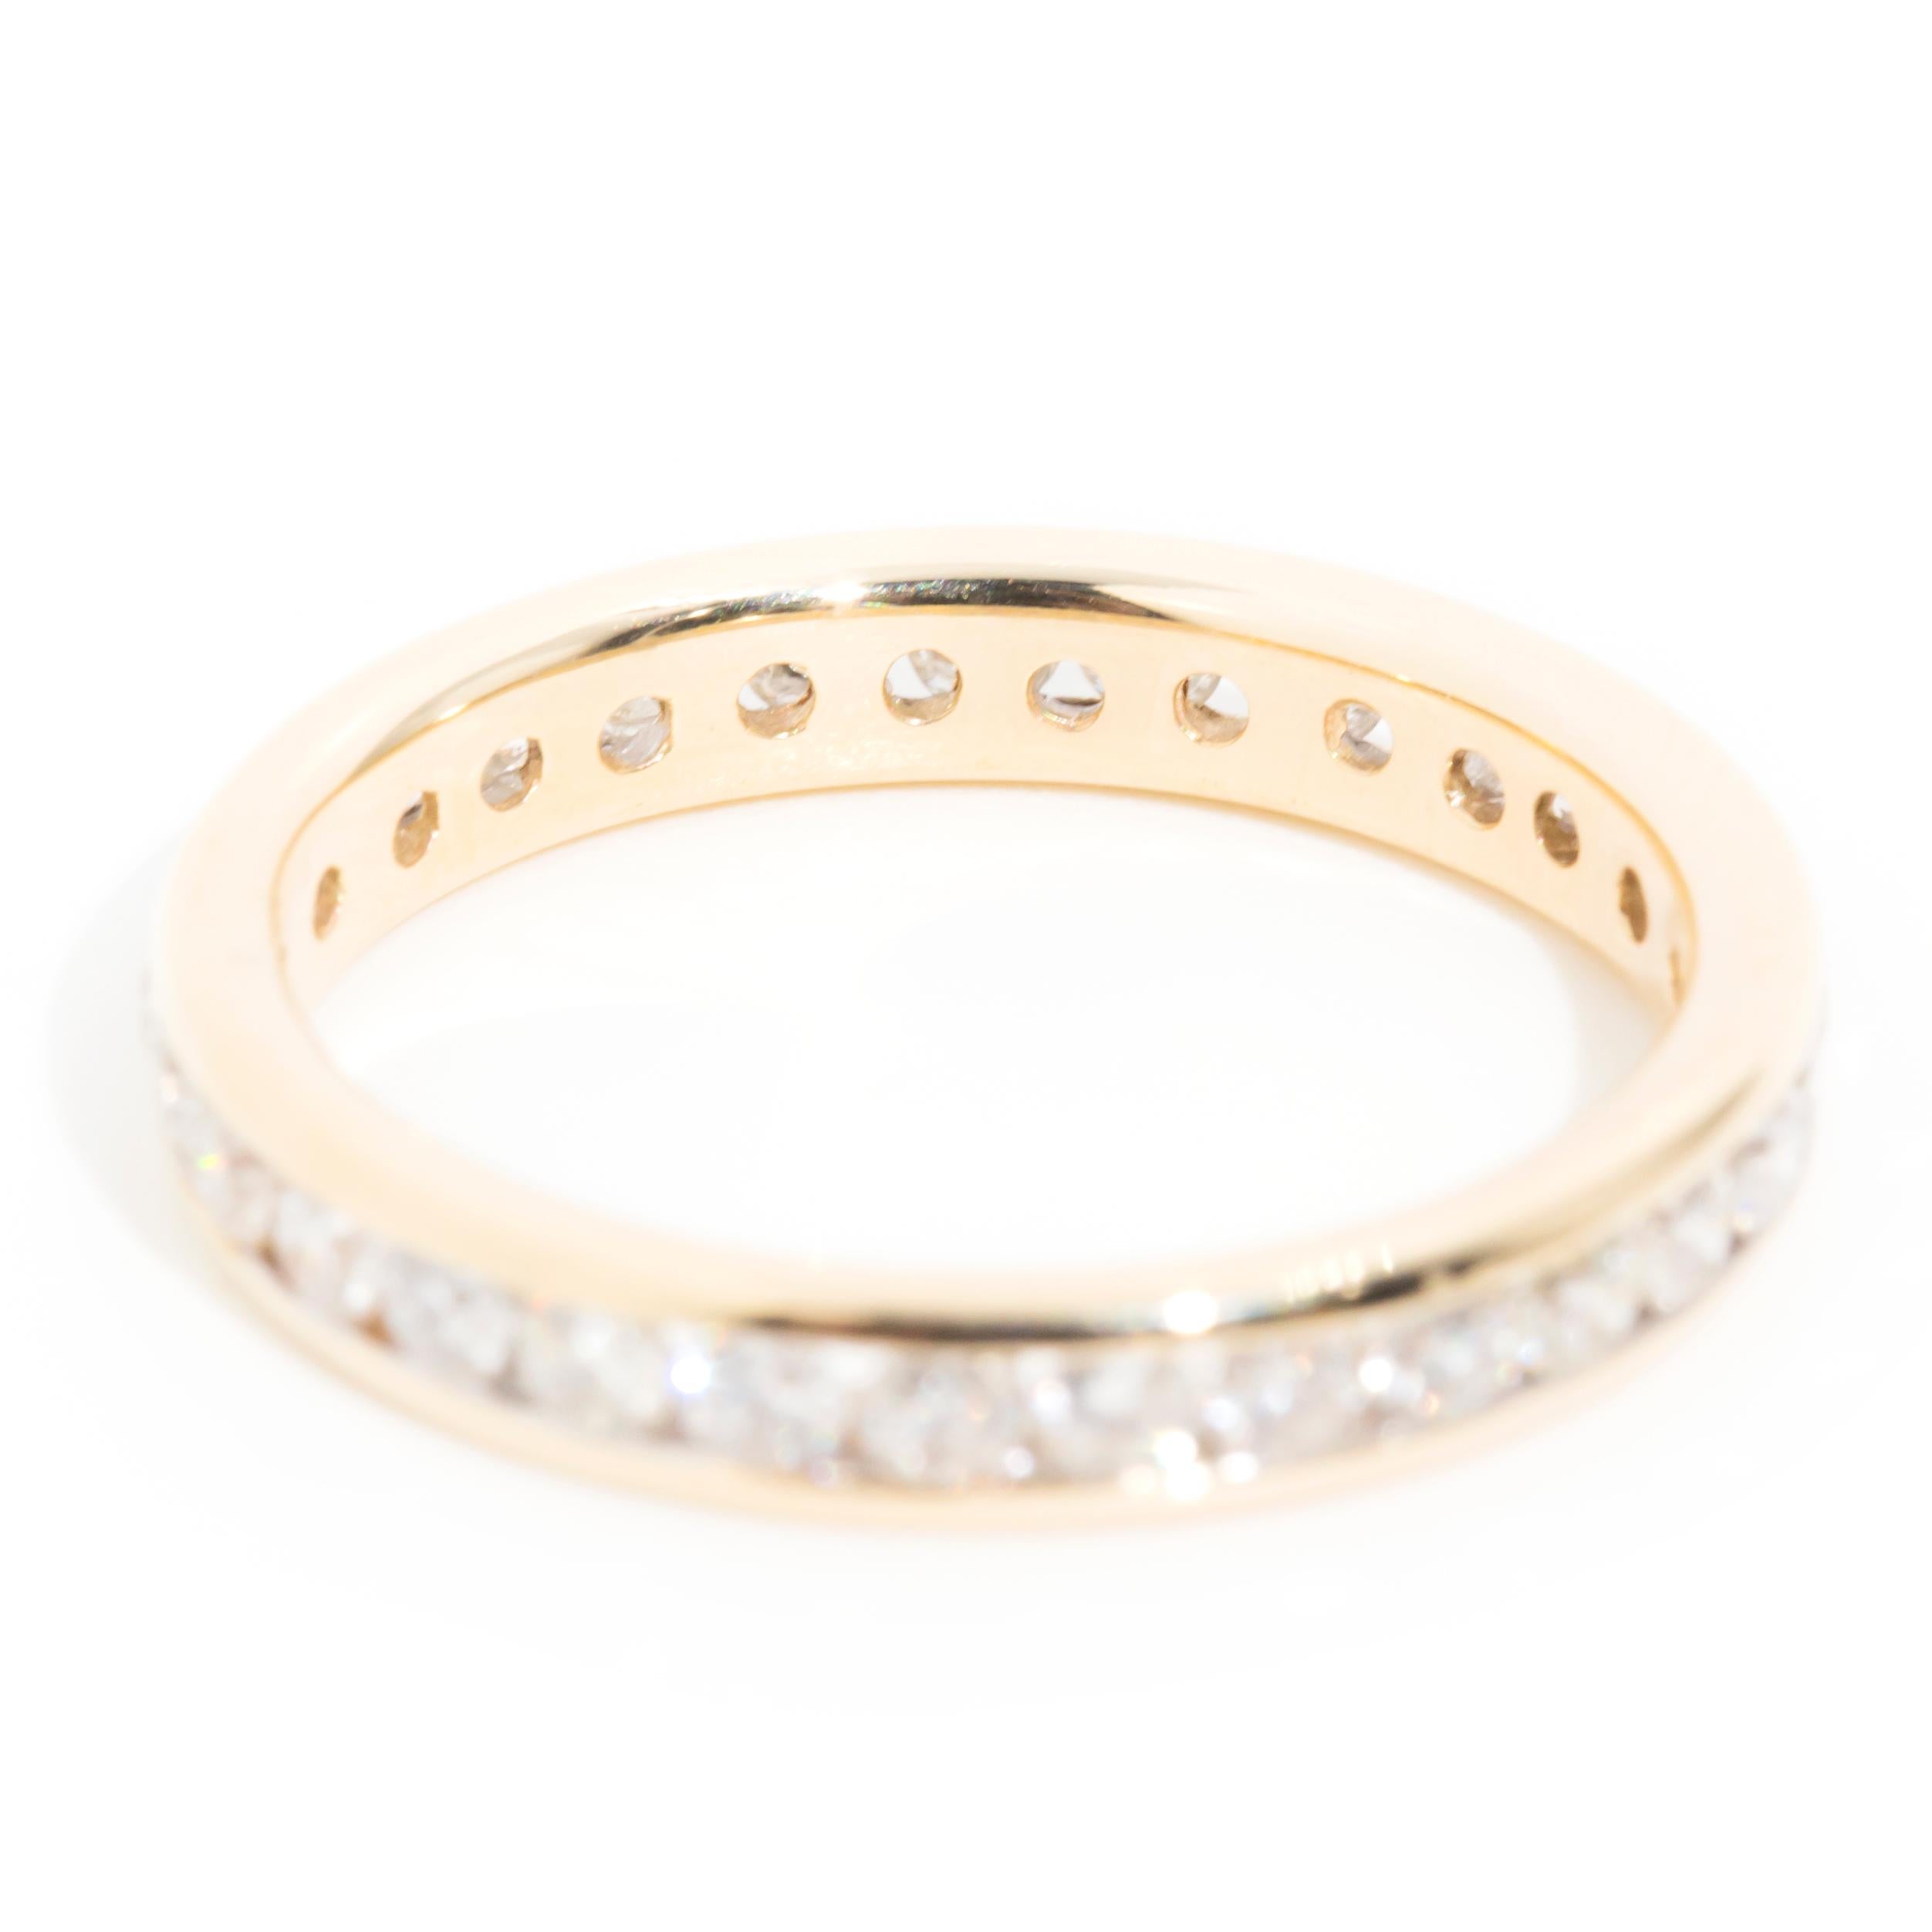 Round Cut Infinity Round Diamond Vintage Eternity Band Ring in 9 Carat Yellow Gold